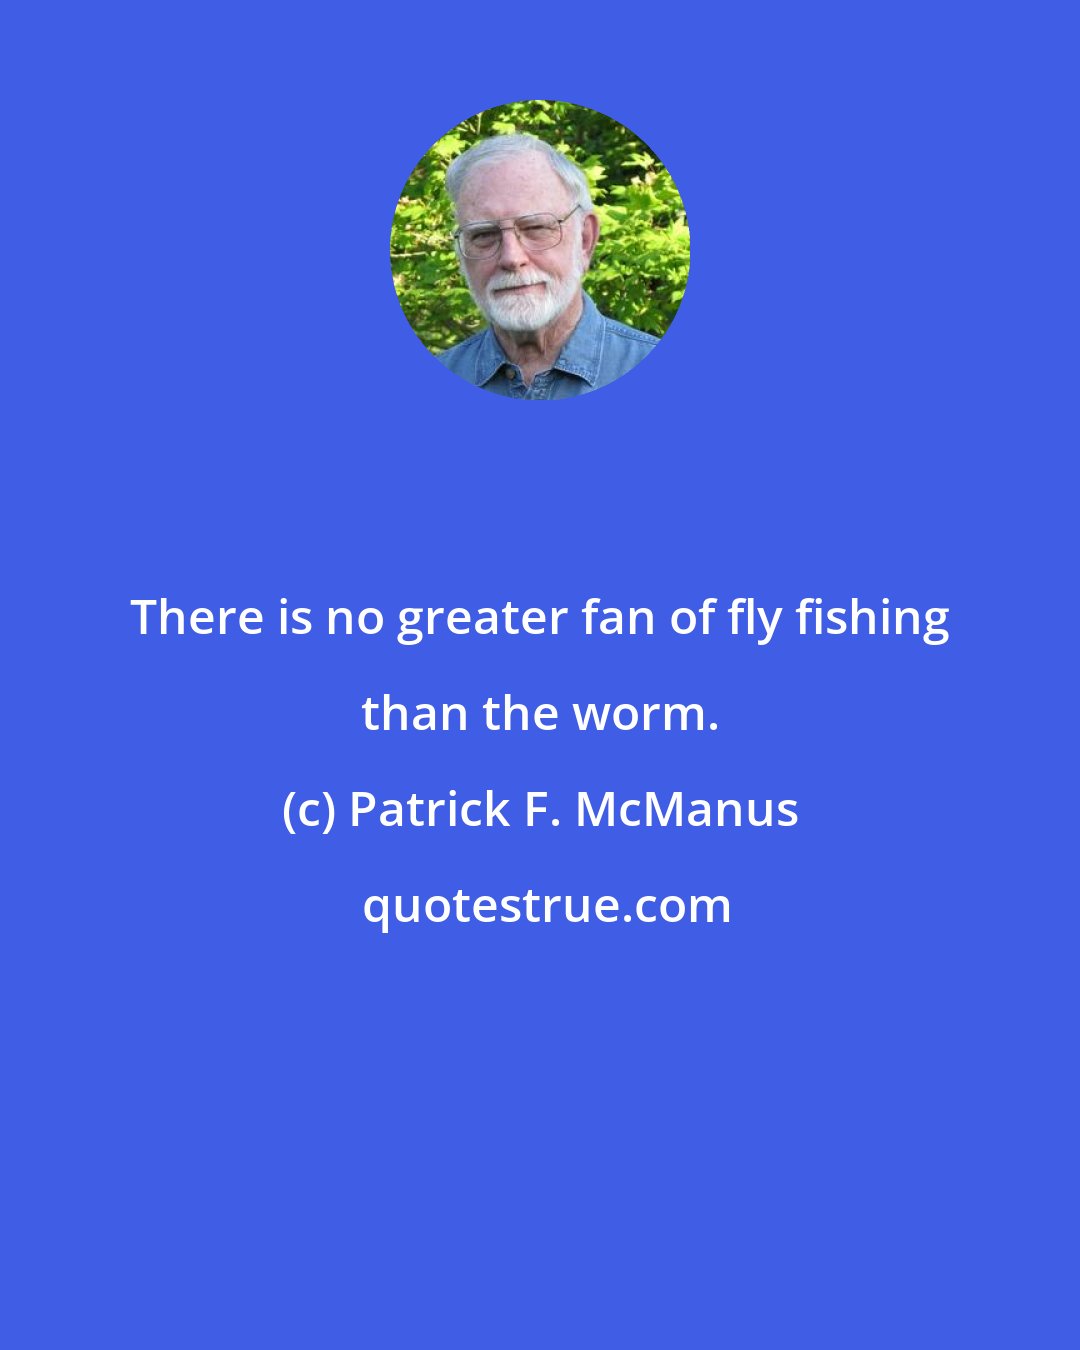 Patrick F. McManus: There is no greater fan of fly fishing than the worm.